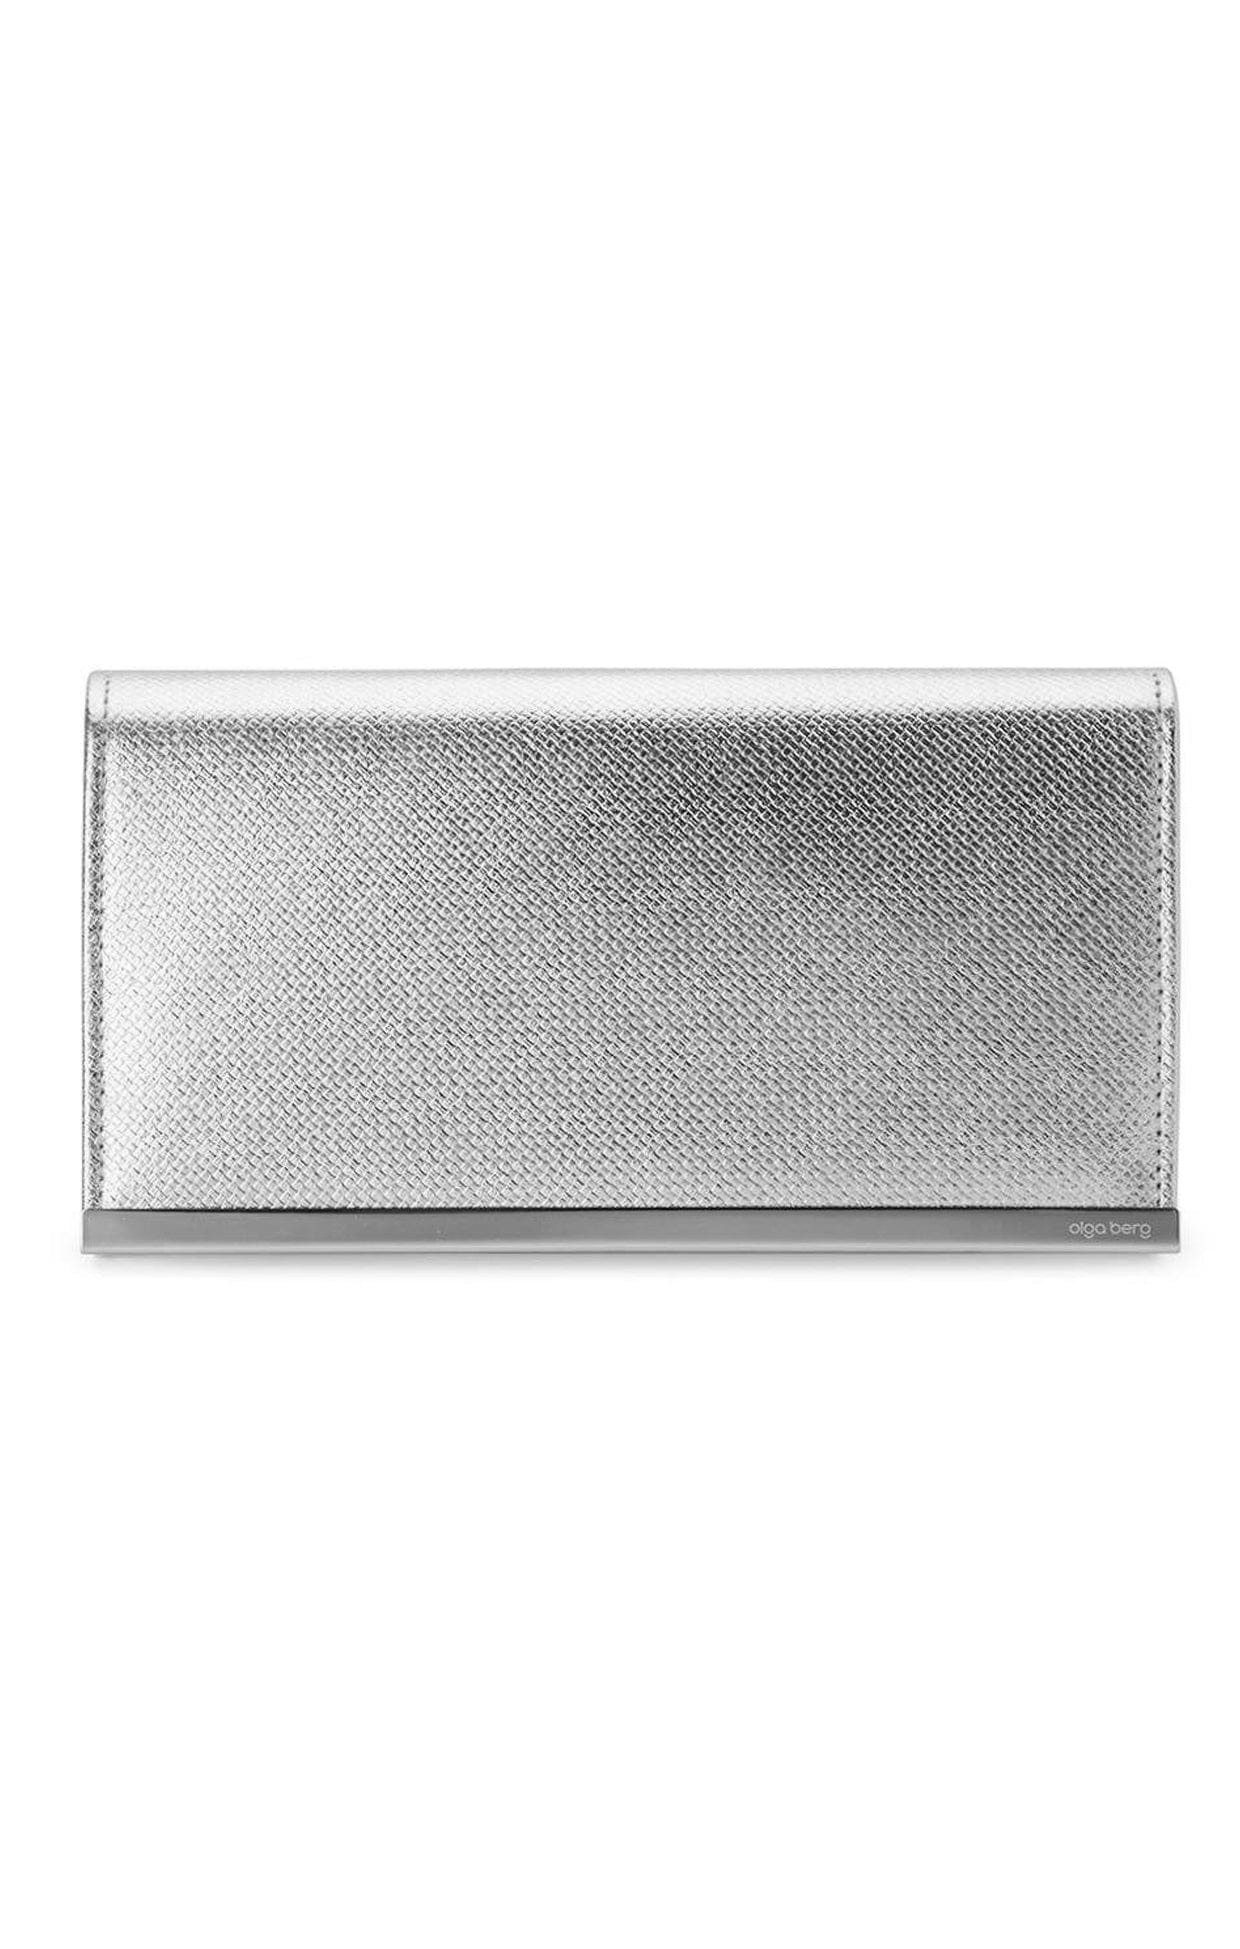 ACCESSORIES Bags Clutches One Size / Neutral MADDIE FOLDOVER CLUTCH IN SILVER